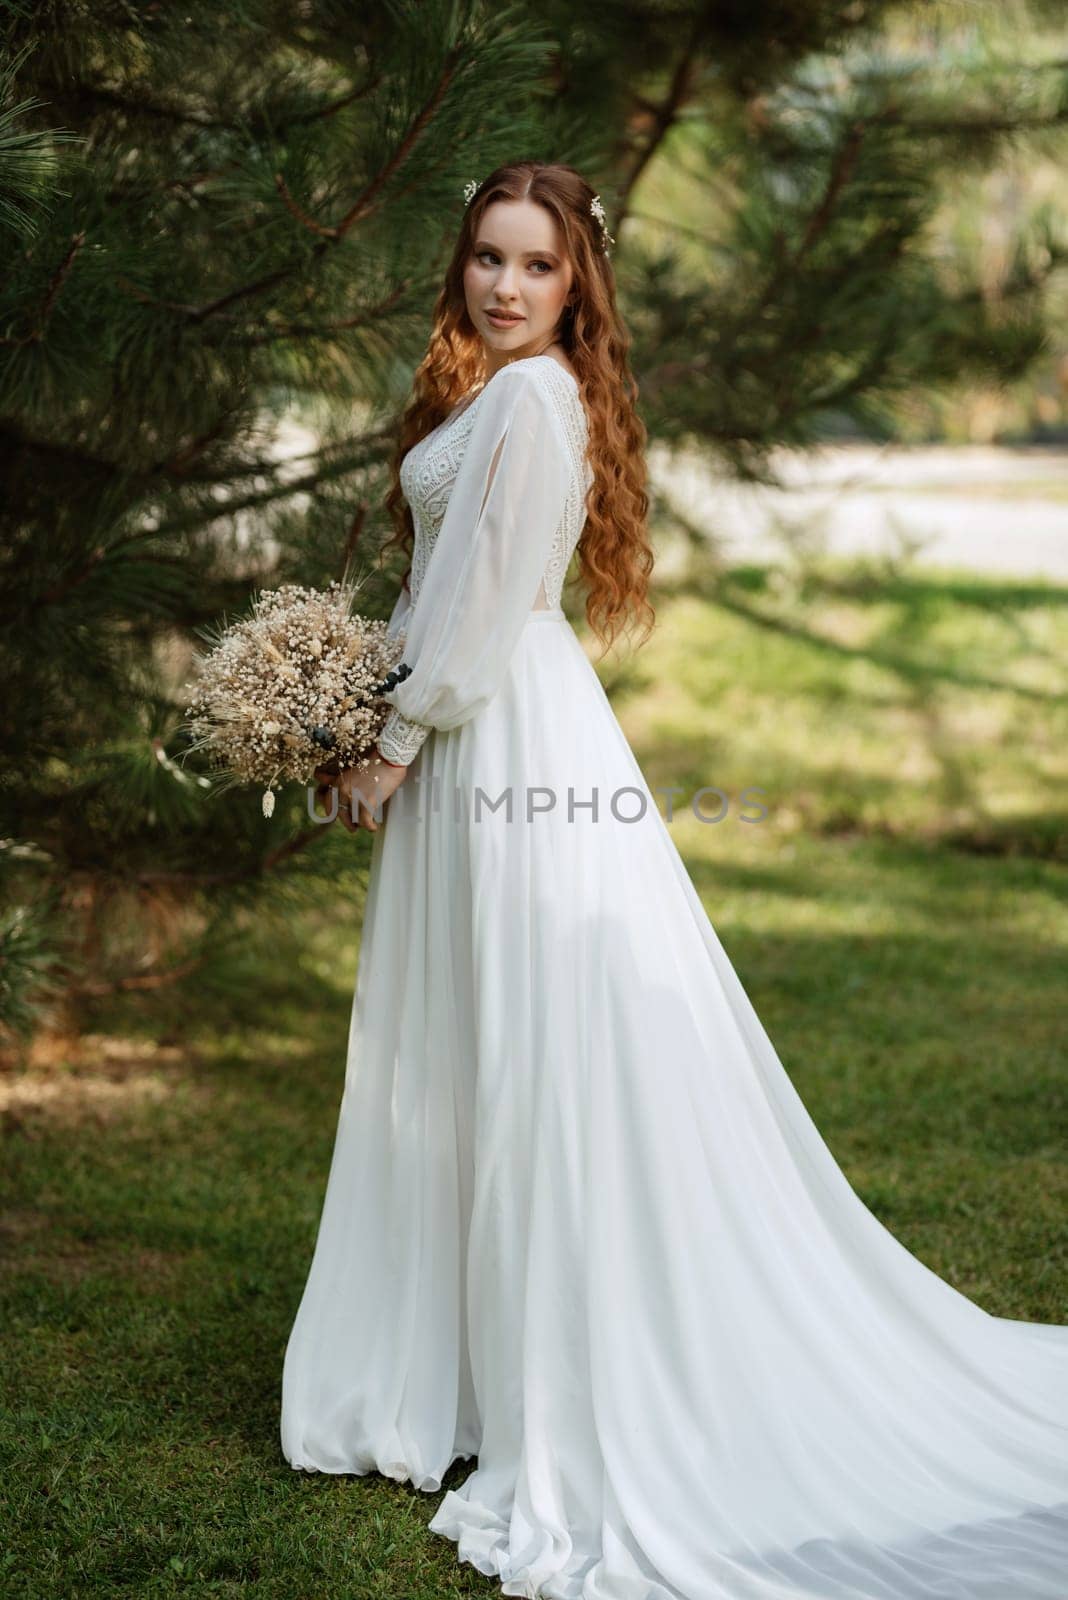 red-haired girl bride with a wedding bouquet by Andreua